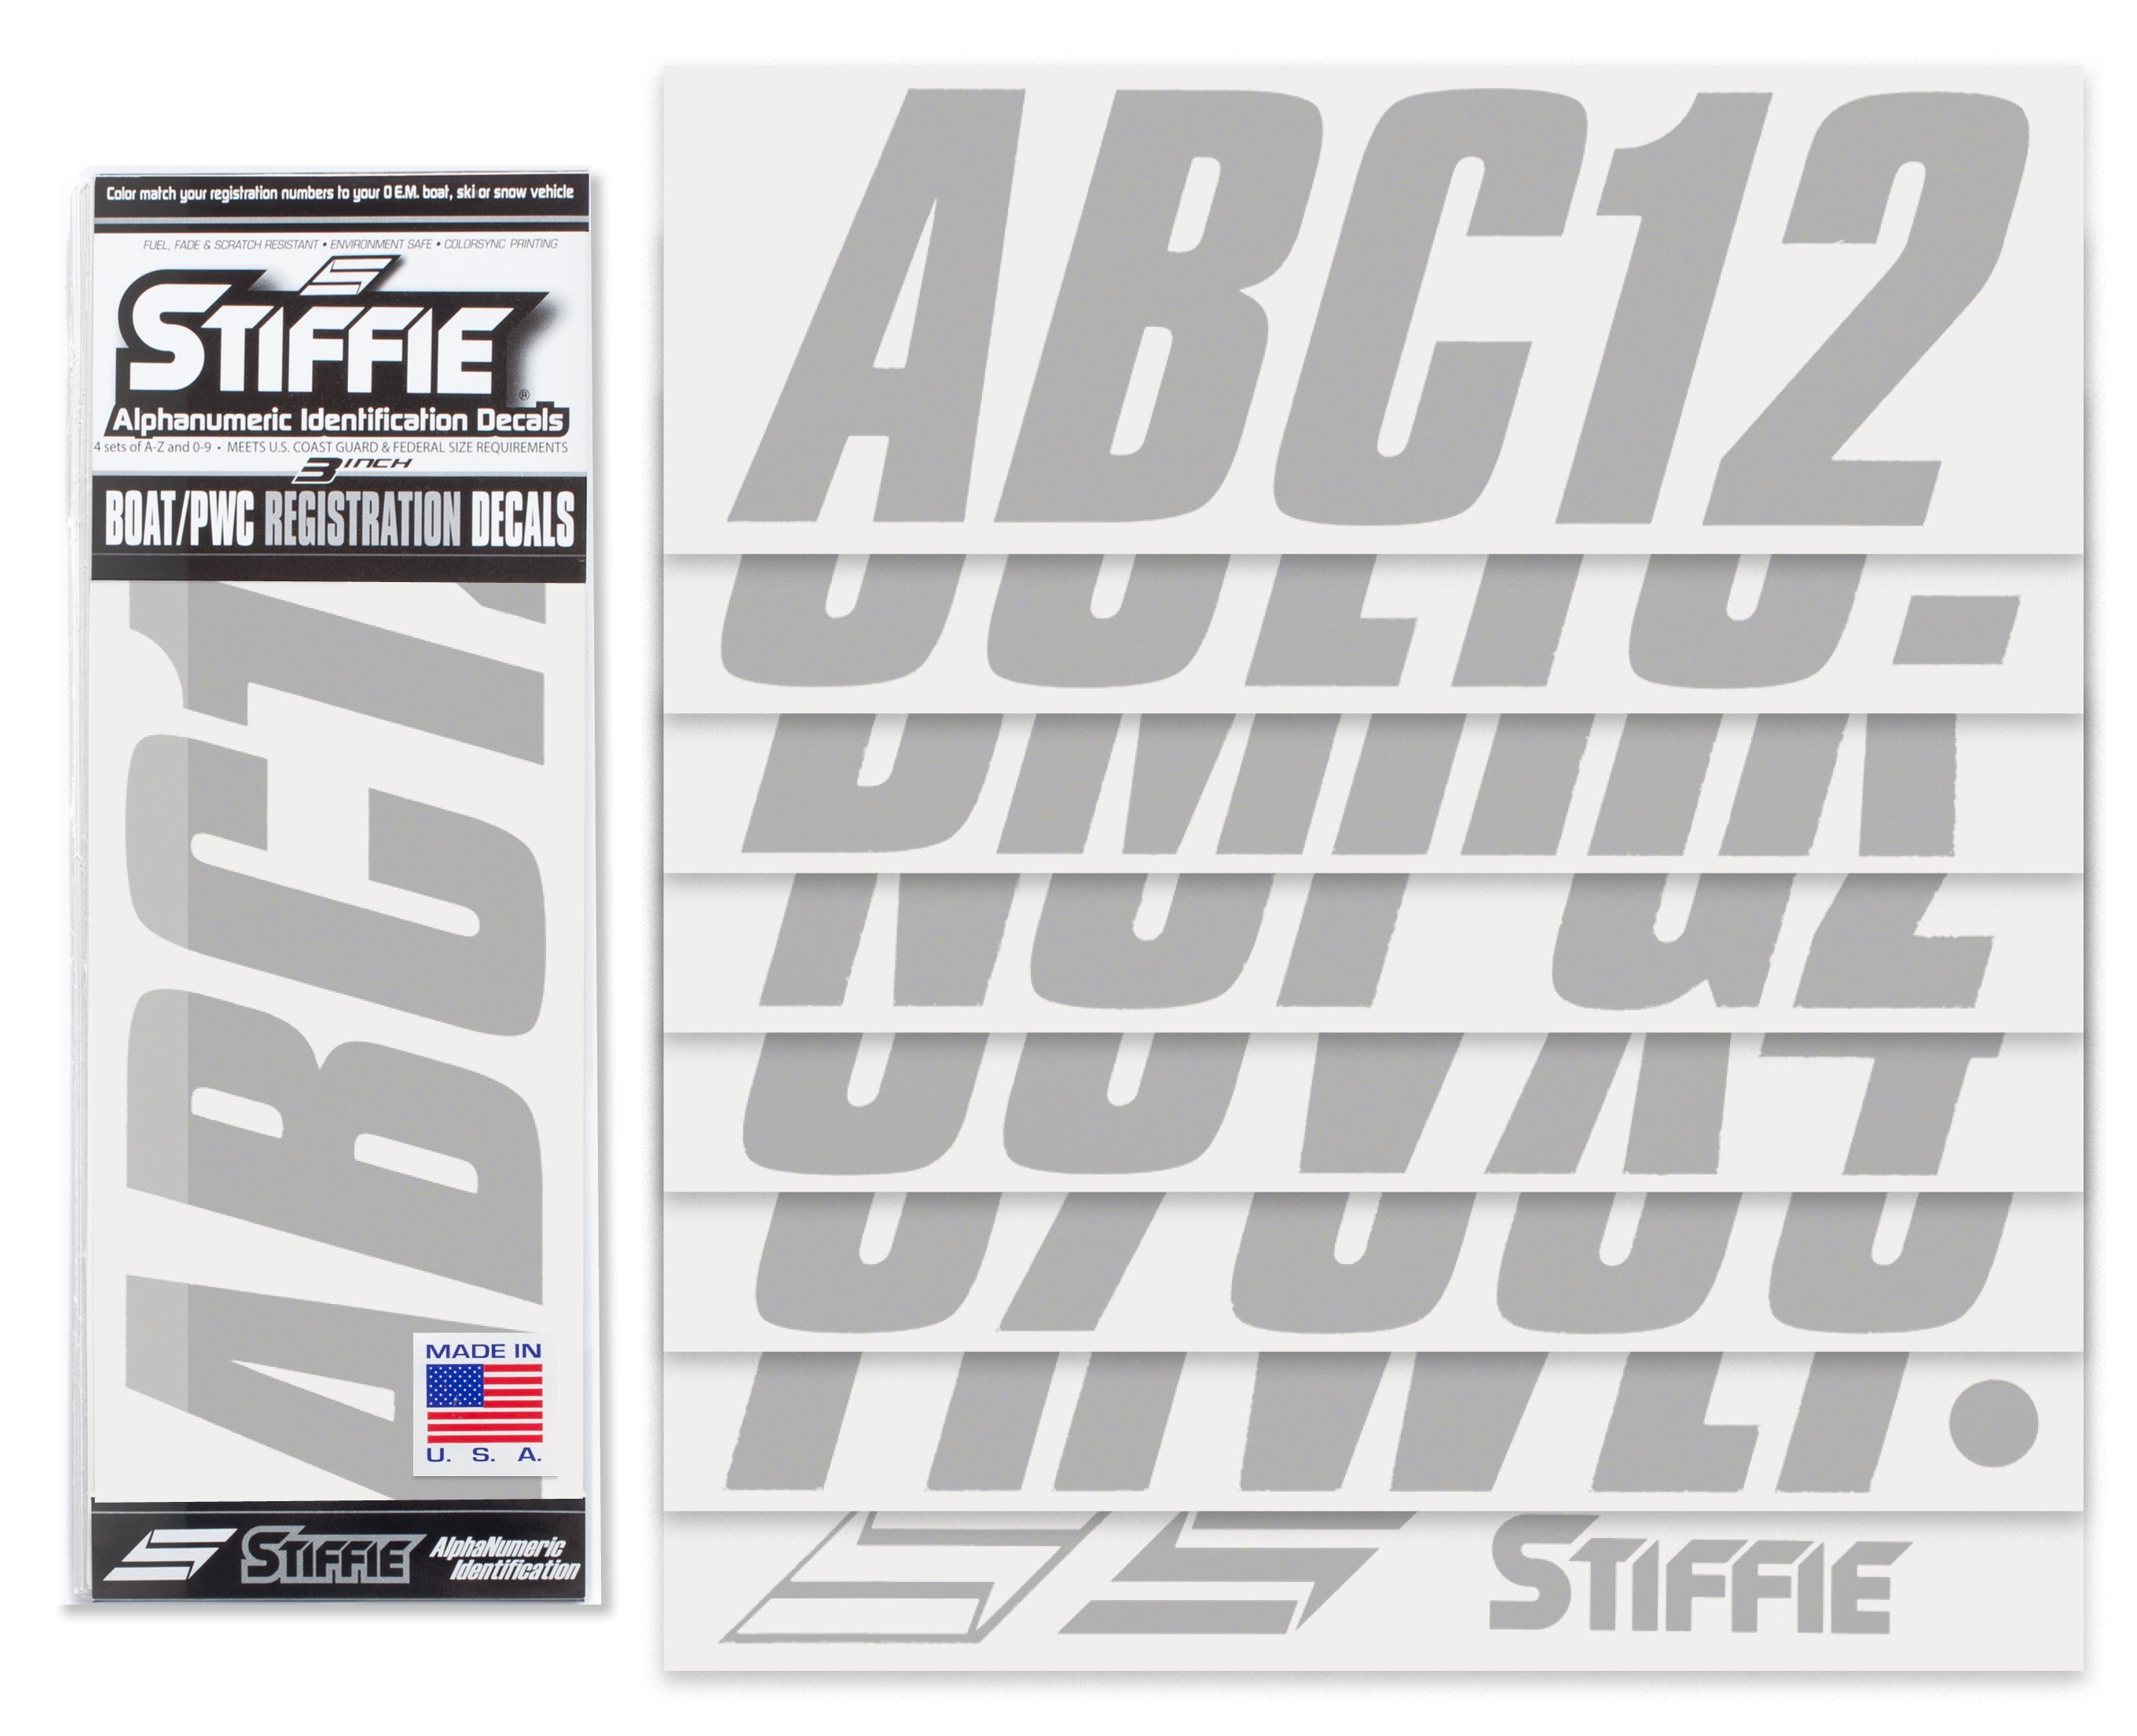 STIFFIE Shift Silver 3" ID Kit Alpha-Numeric Registration Identification Numbers Stickers Decals for Boats & Personal Watercraft